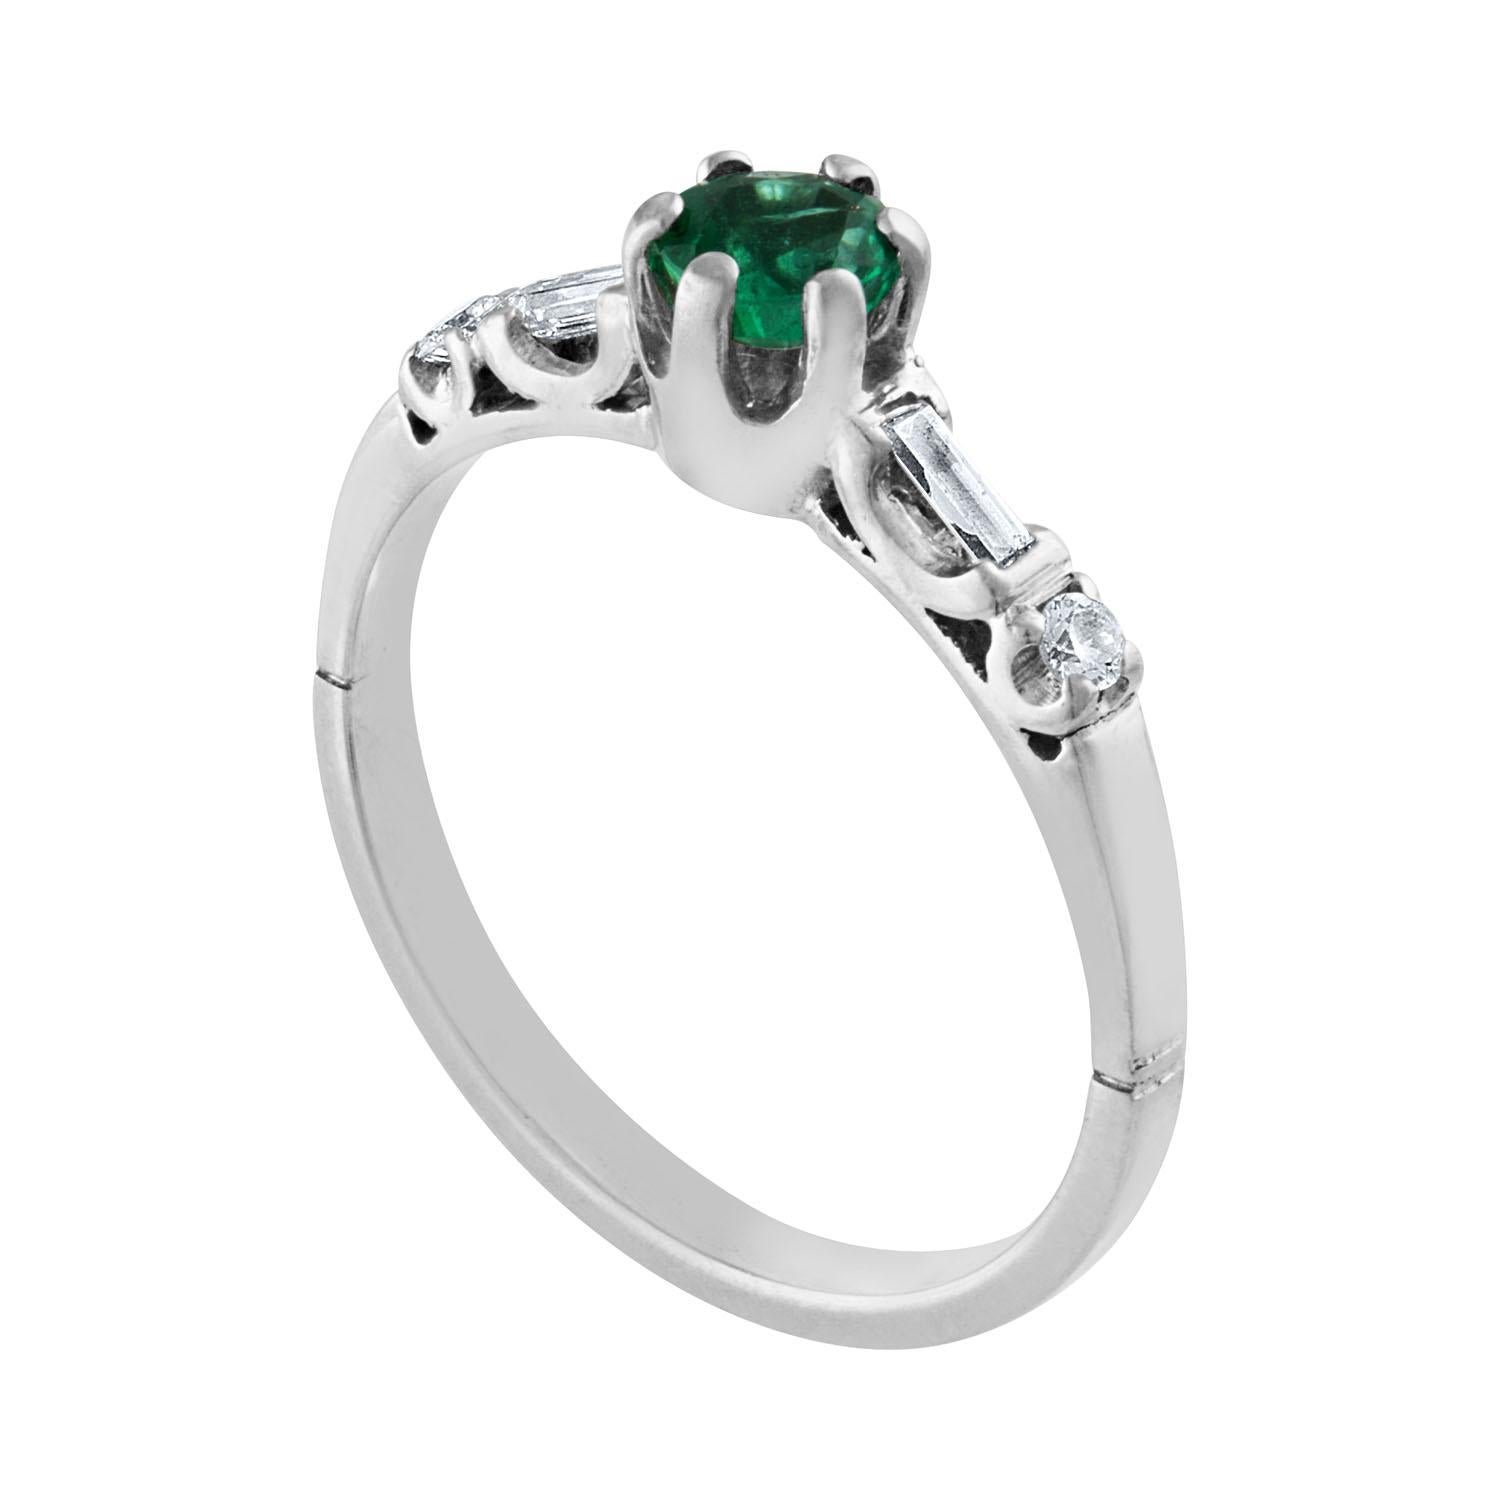 The ring is Platinum
The Emerald is a round 0.31 Carat Natural Emerald
There are 0.10 Carats in Diamonds F/G VS
There are 2 round diamonds and 2 baguette diamonds
The ring is a size 6.0, sizable.
The ring weighs 3.3 grams